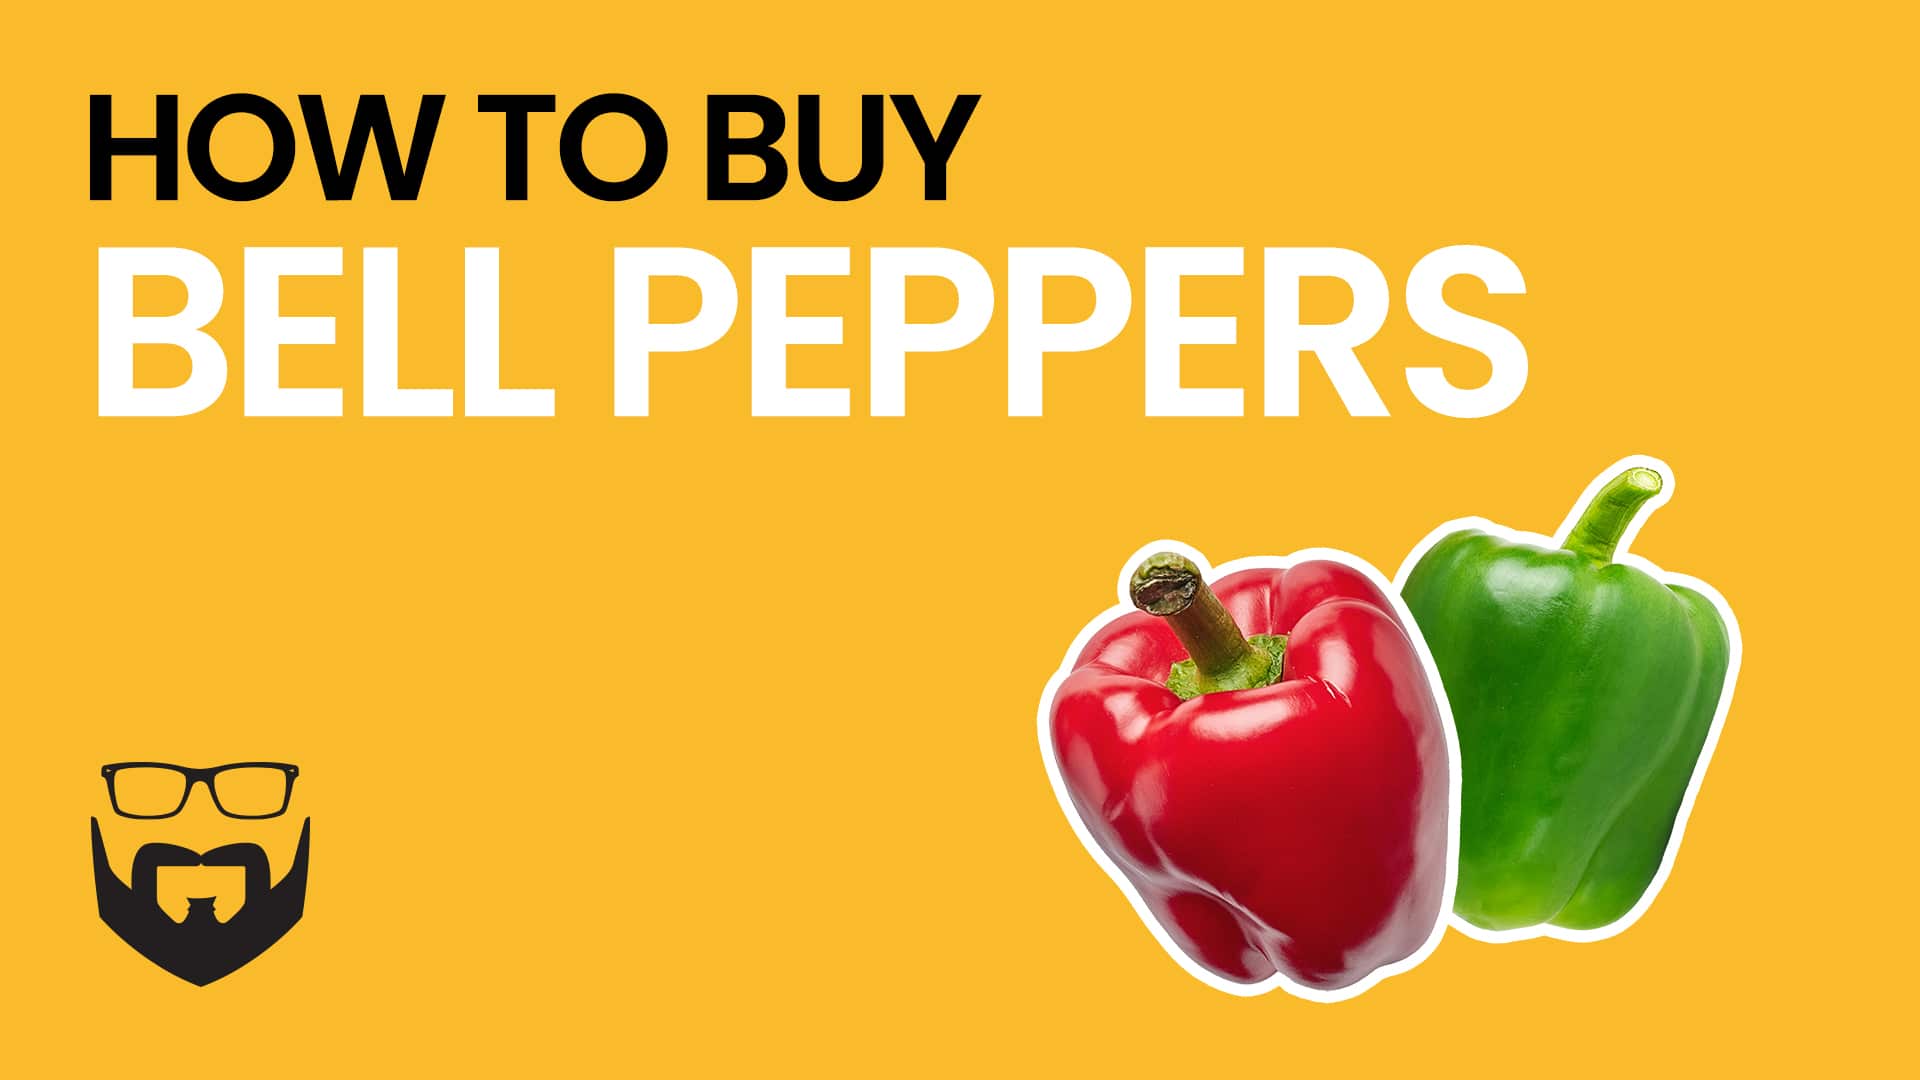 How to Buy Bell Peppers Video - Yellow